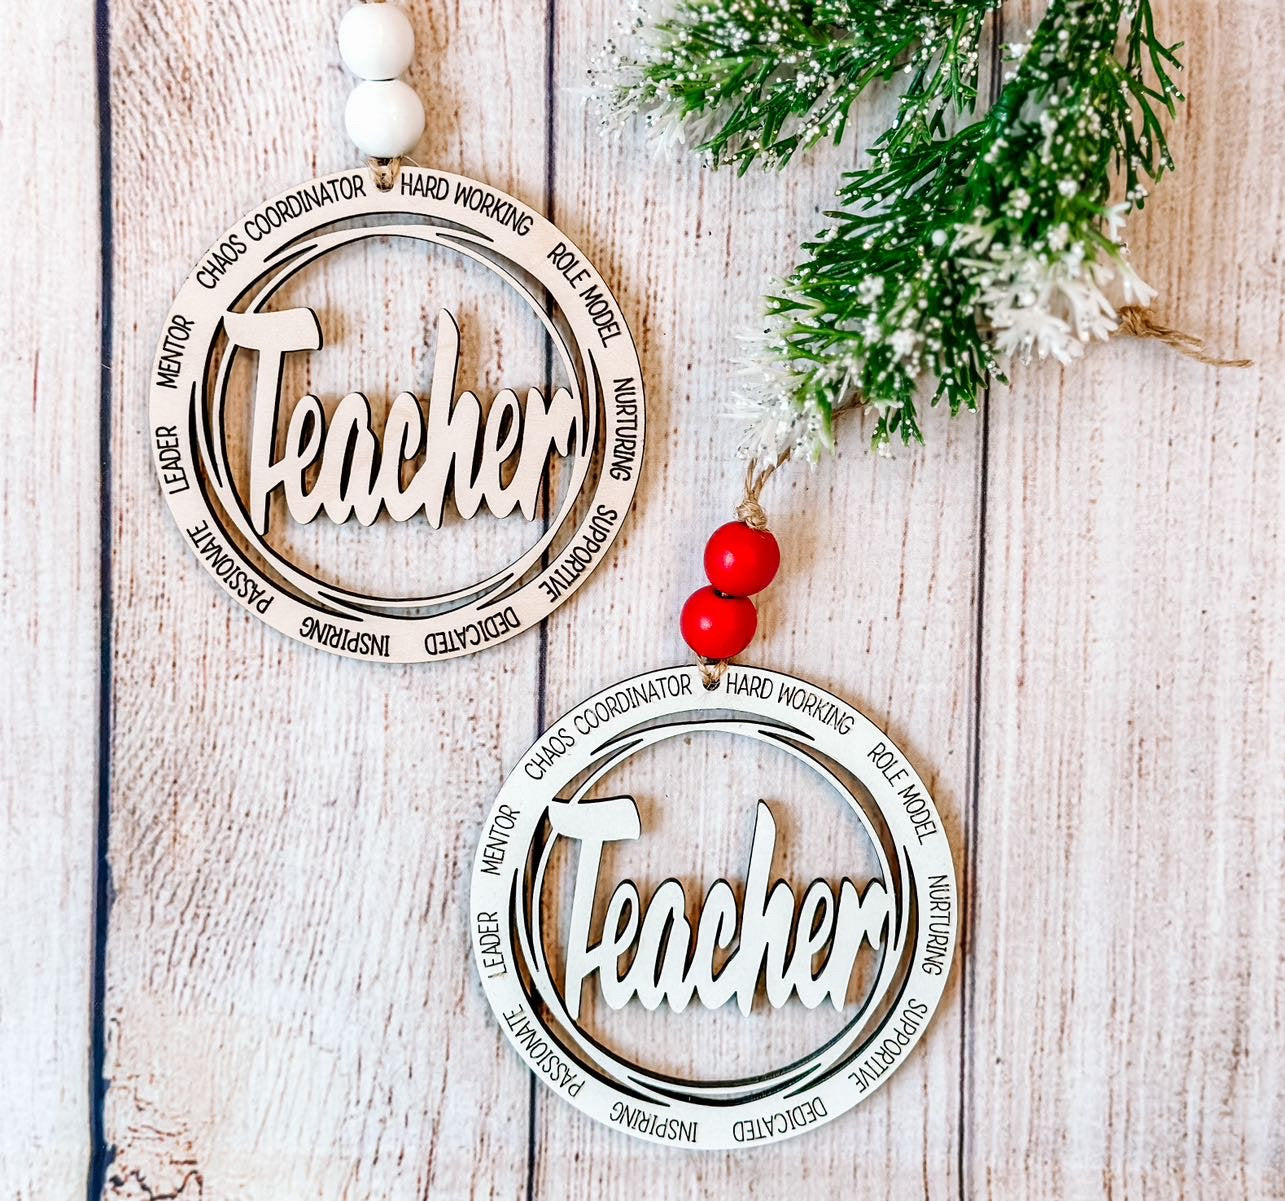 Teacher Ornament, Teacher Gifts Personalized, Thank You Teacher, Teacher Christmas Gifts, Christmas Ornaments Handmade, Gifts for Educators